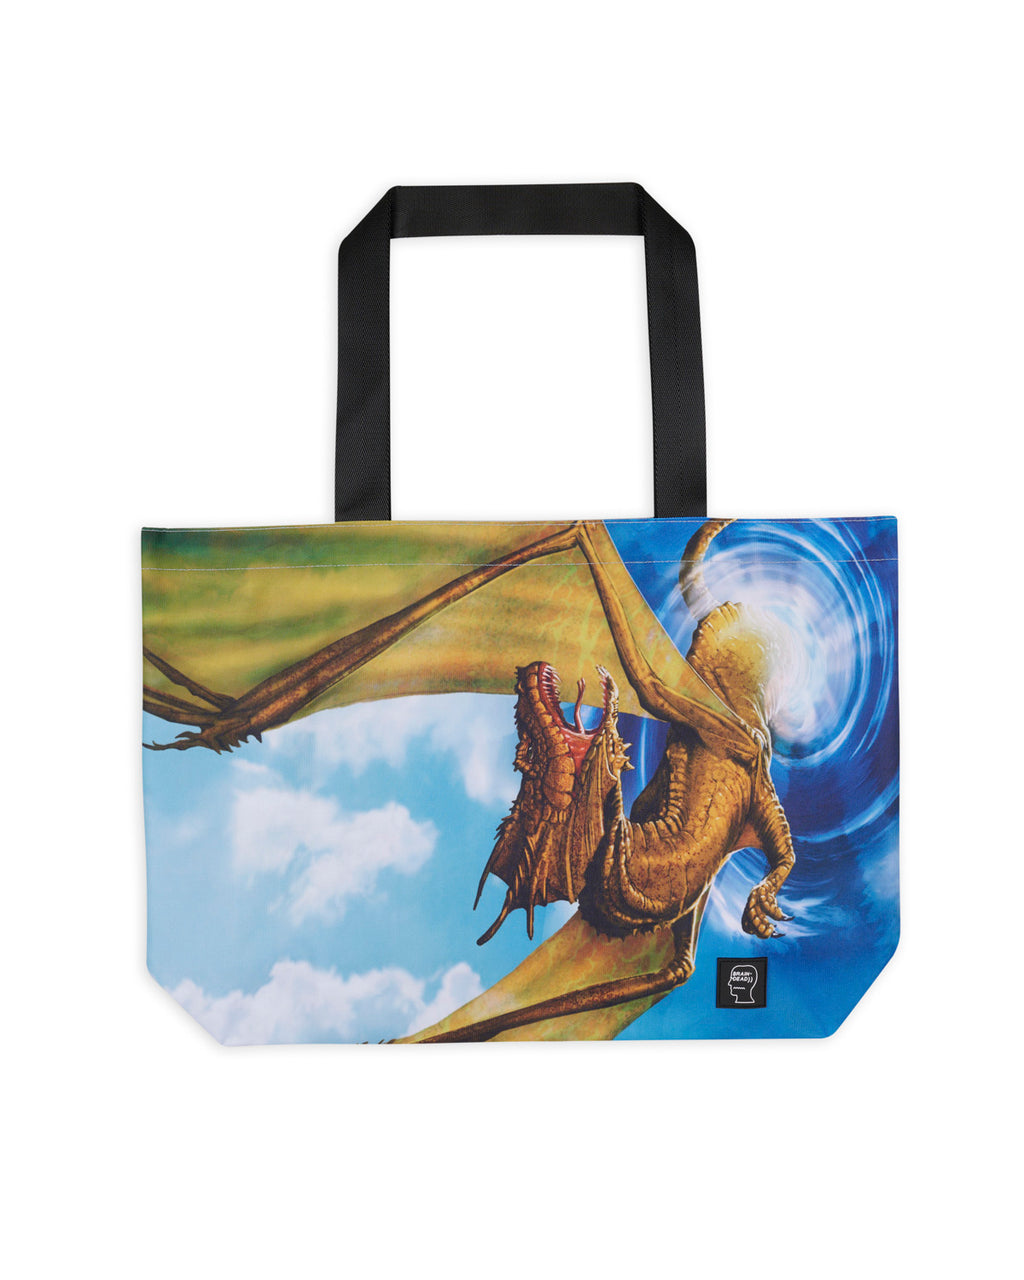 https://cdn.shopify.com/s/files/1/0642/8893/products/Brain_Dead_x_Magic_The_Gathering_Boomerang_Tote_Bag_Blue_Front_optimized.jpg?v=1671039565&width=1024